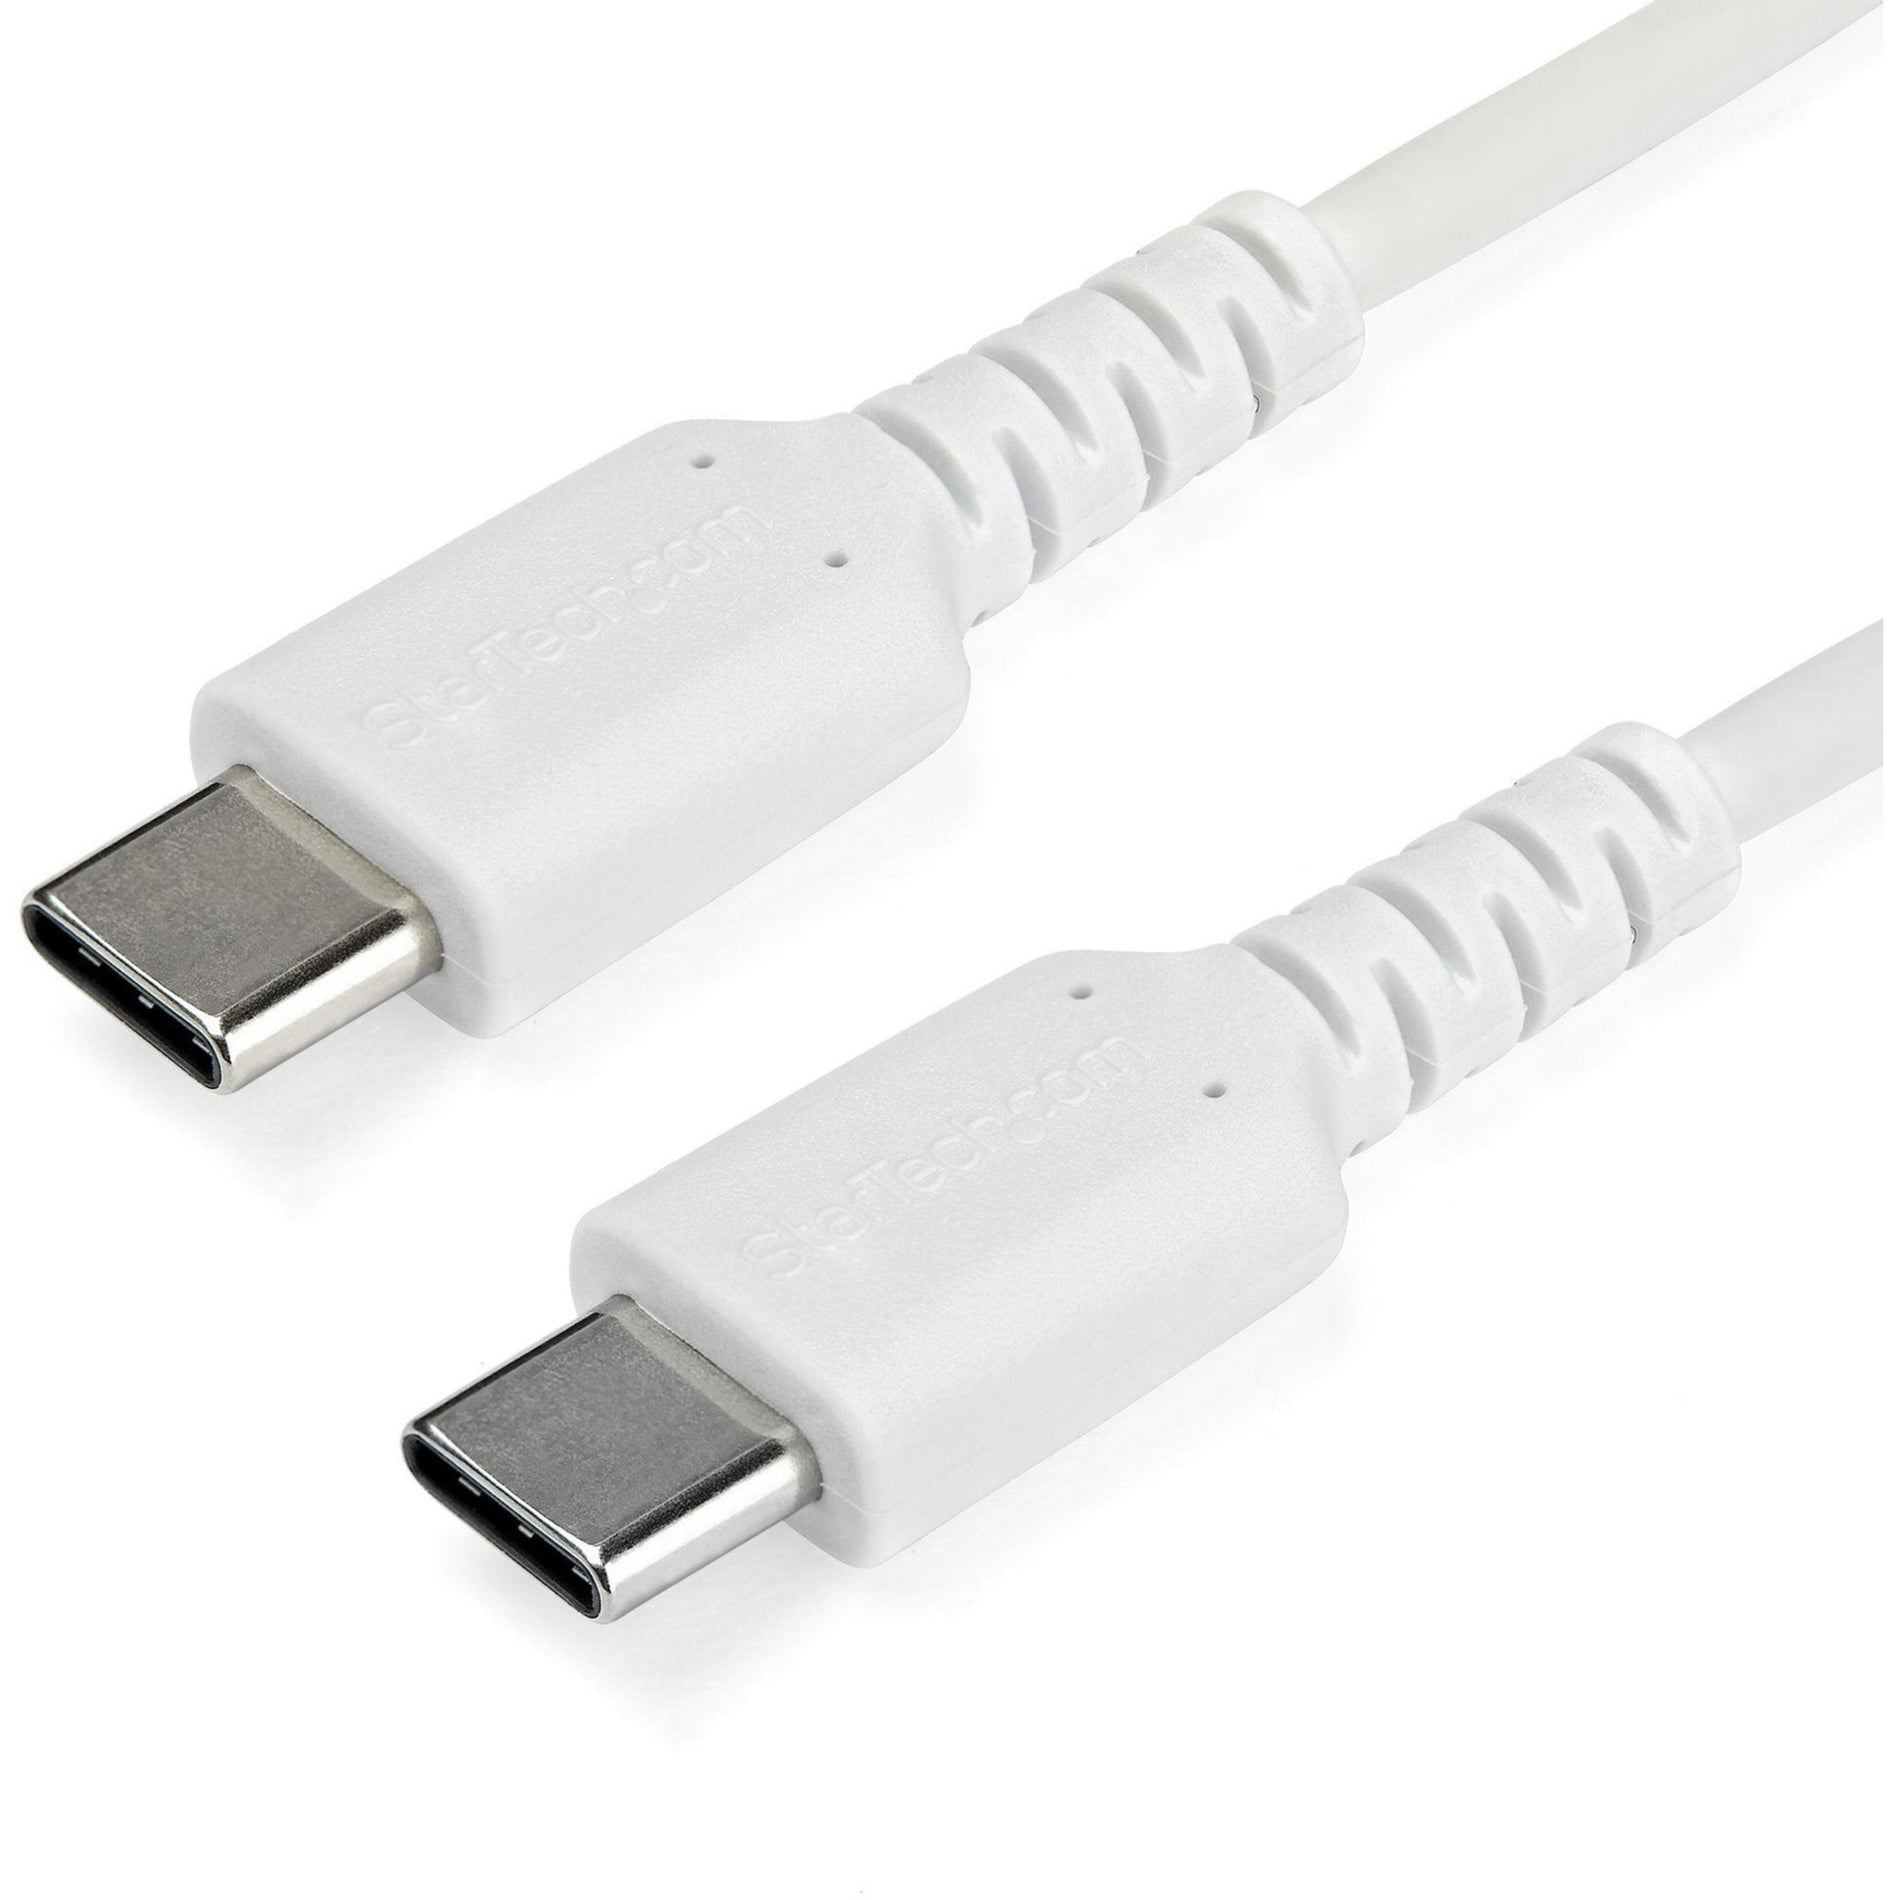 StarTech.com RUSB2CC2MW 2 m (6.6 ft) USB C Cable - High Quality USB 2.0 Type C Cable, White - Durable USB Charging Cable